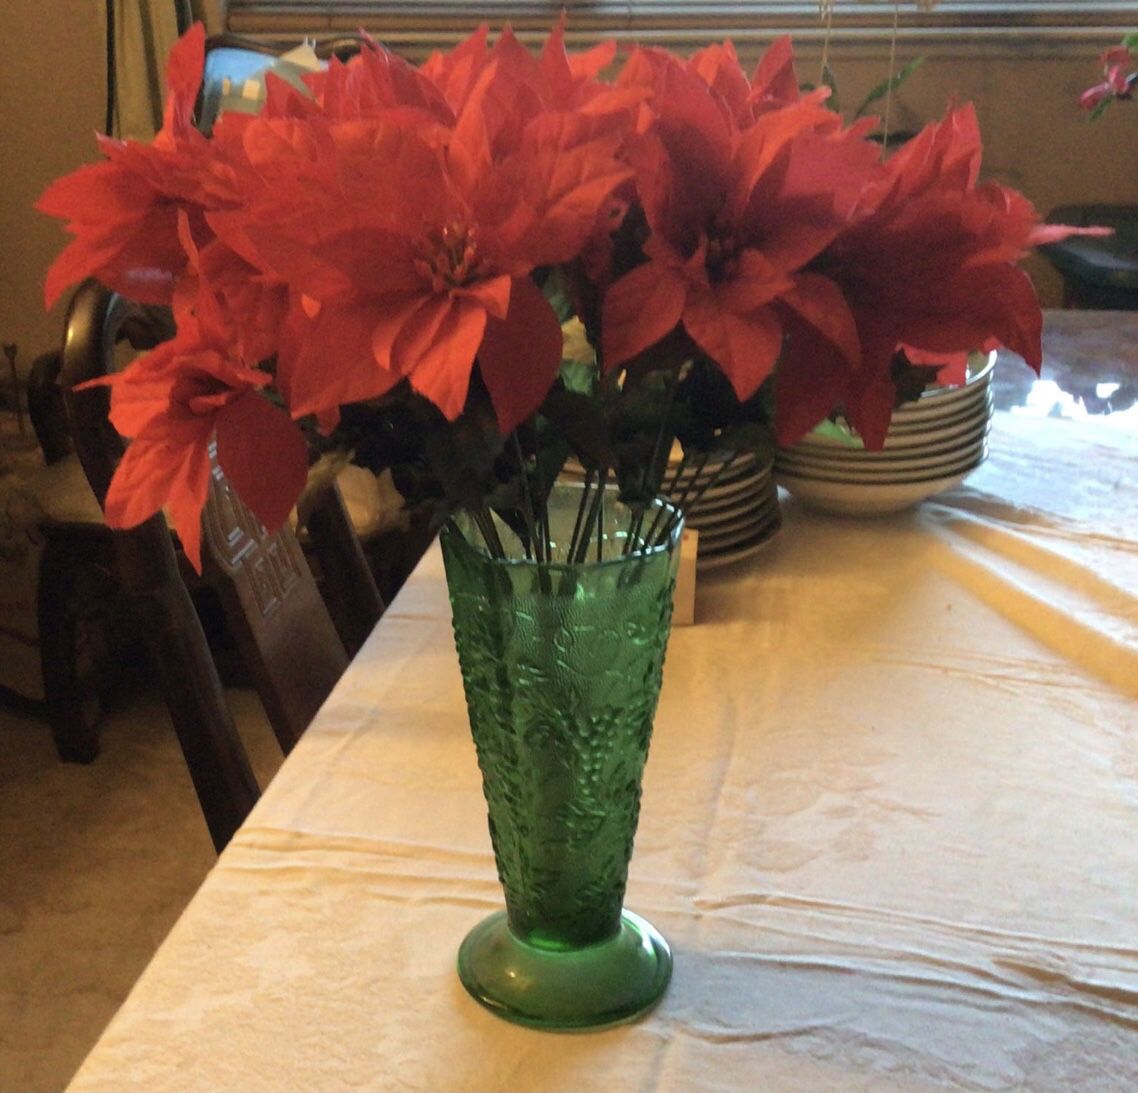 RED  SILK POINSETTIAS - 21 FLOWERS IN A GREEN VASE  - NEW